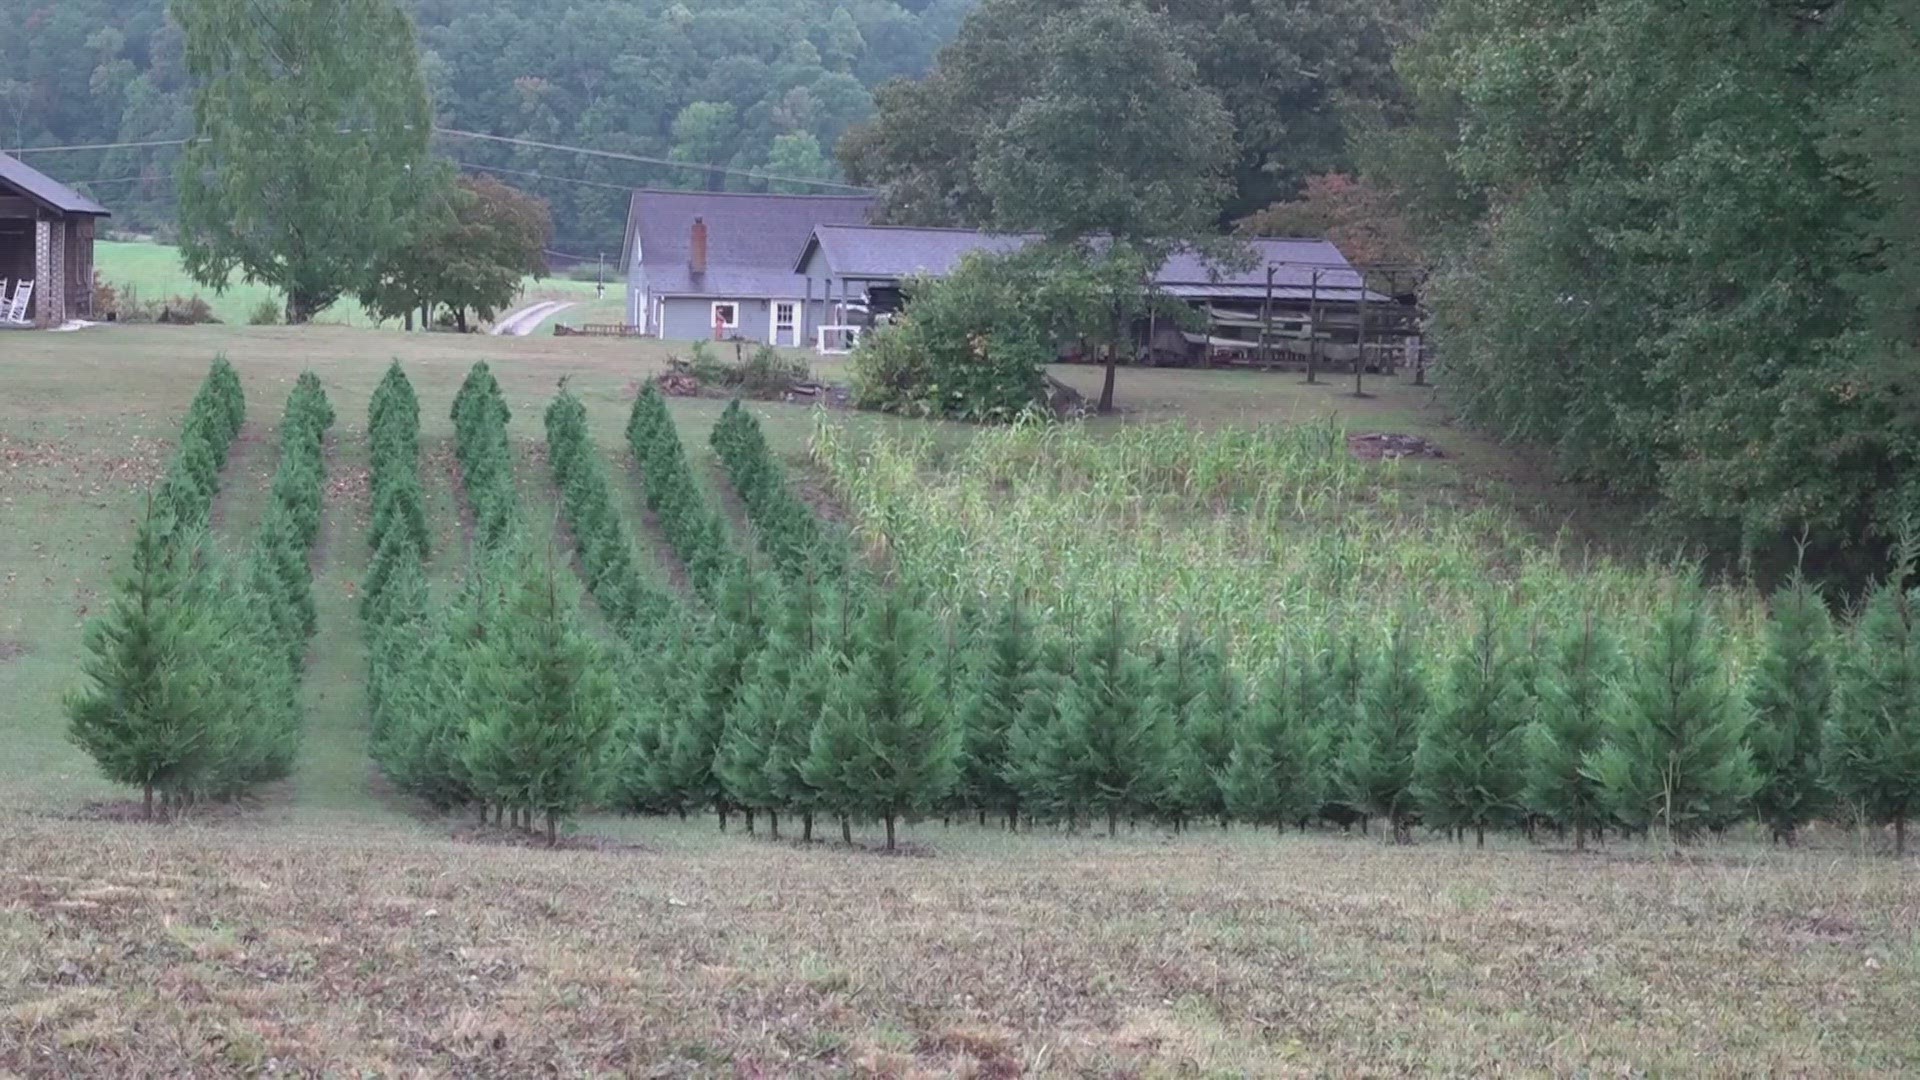 A farmer in Heiskell said the cold weather and dry conditions have taken a toll on the Christmas trees he grows and sells.